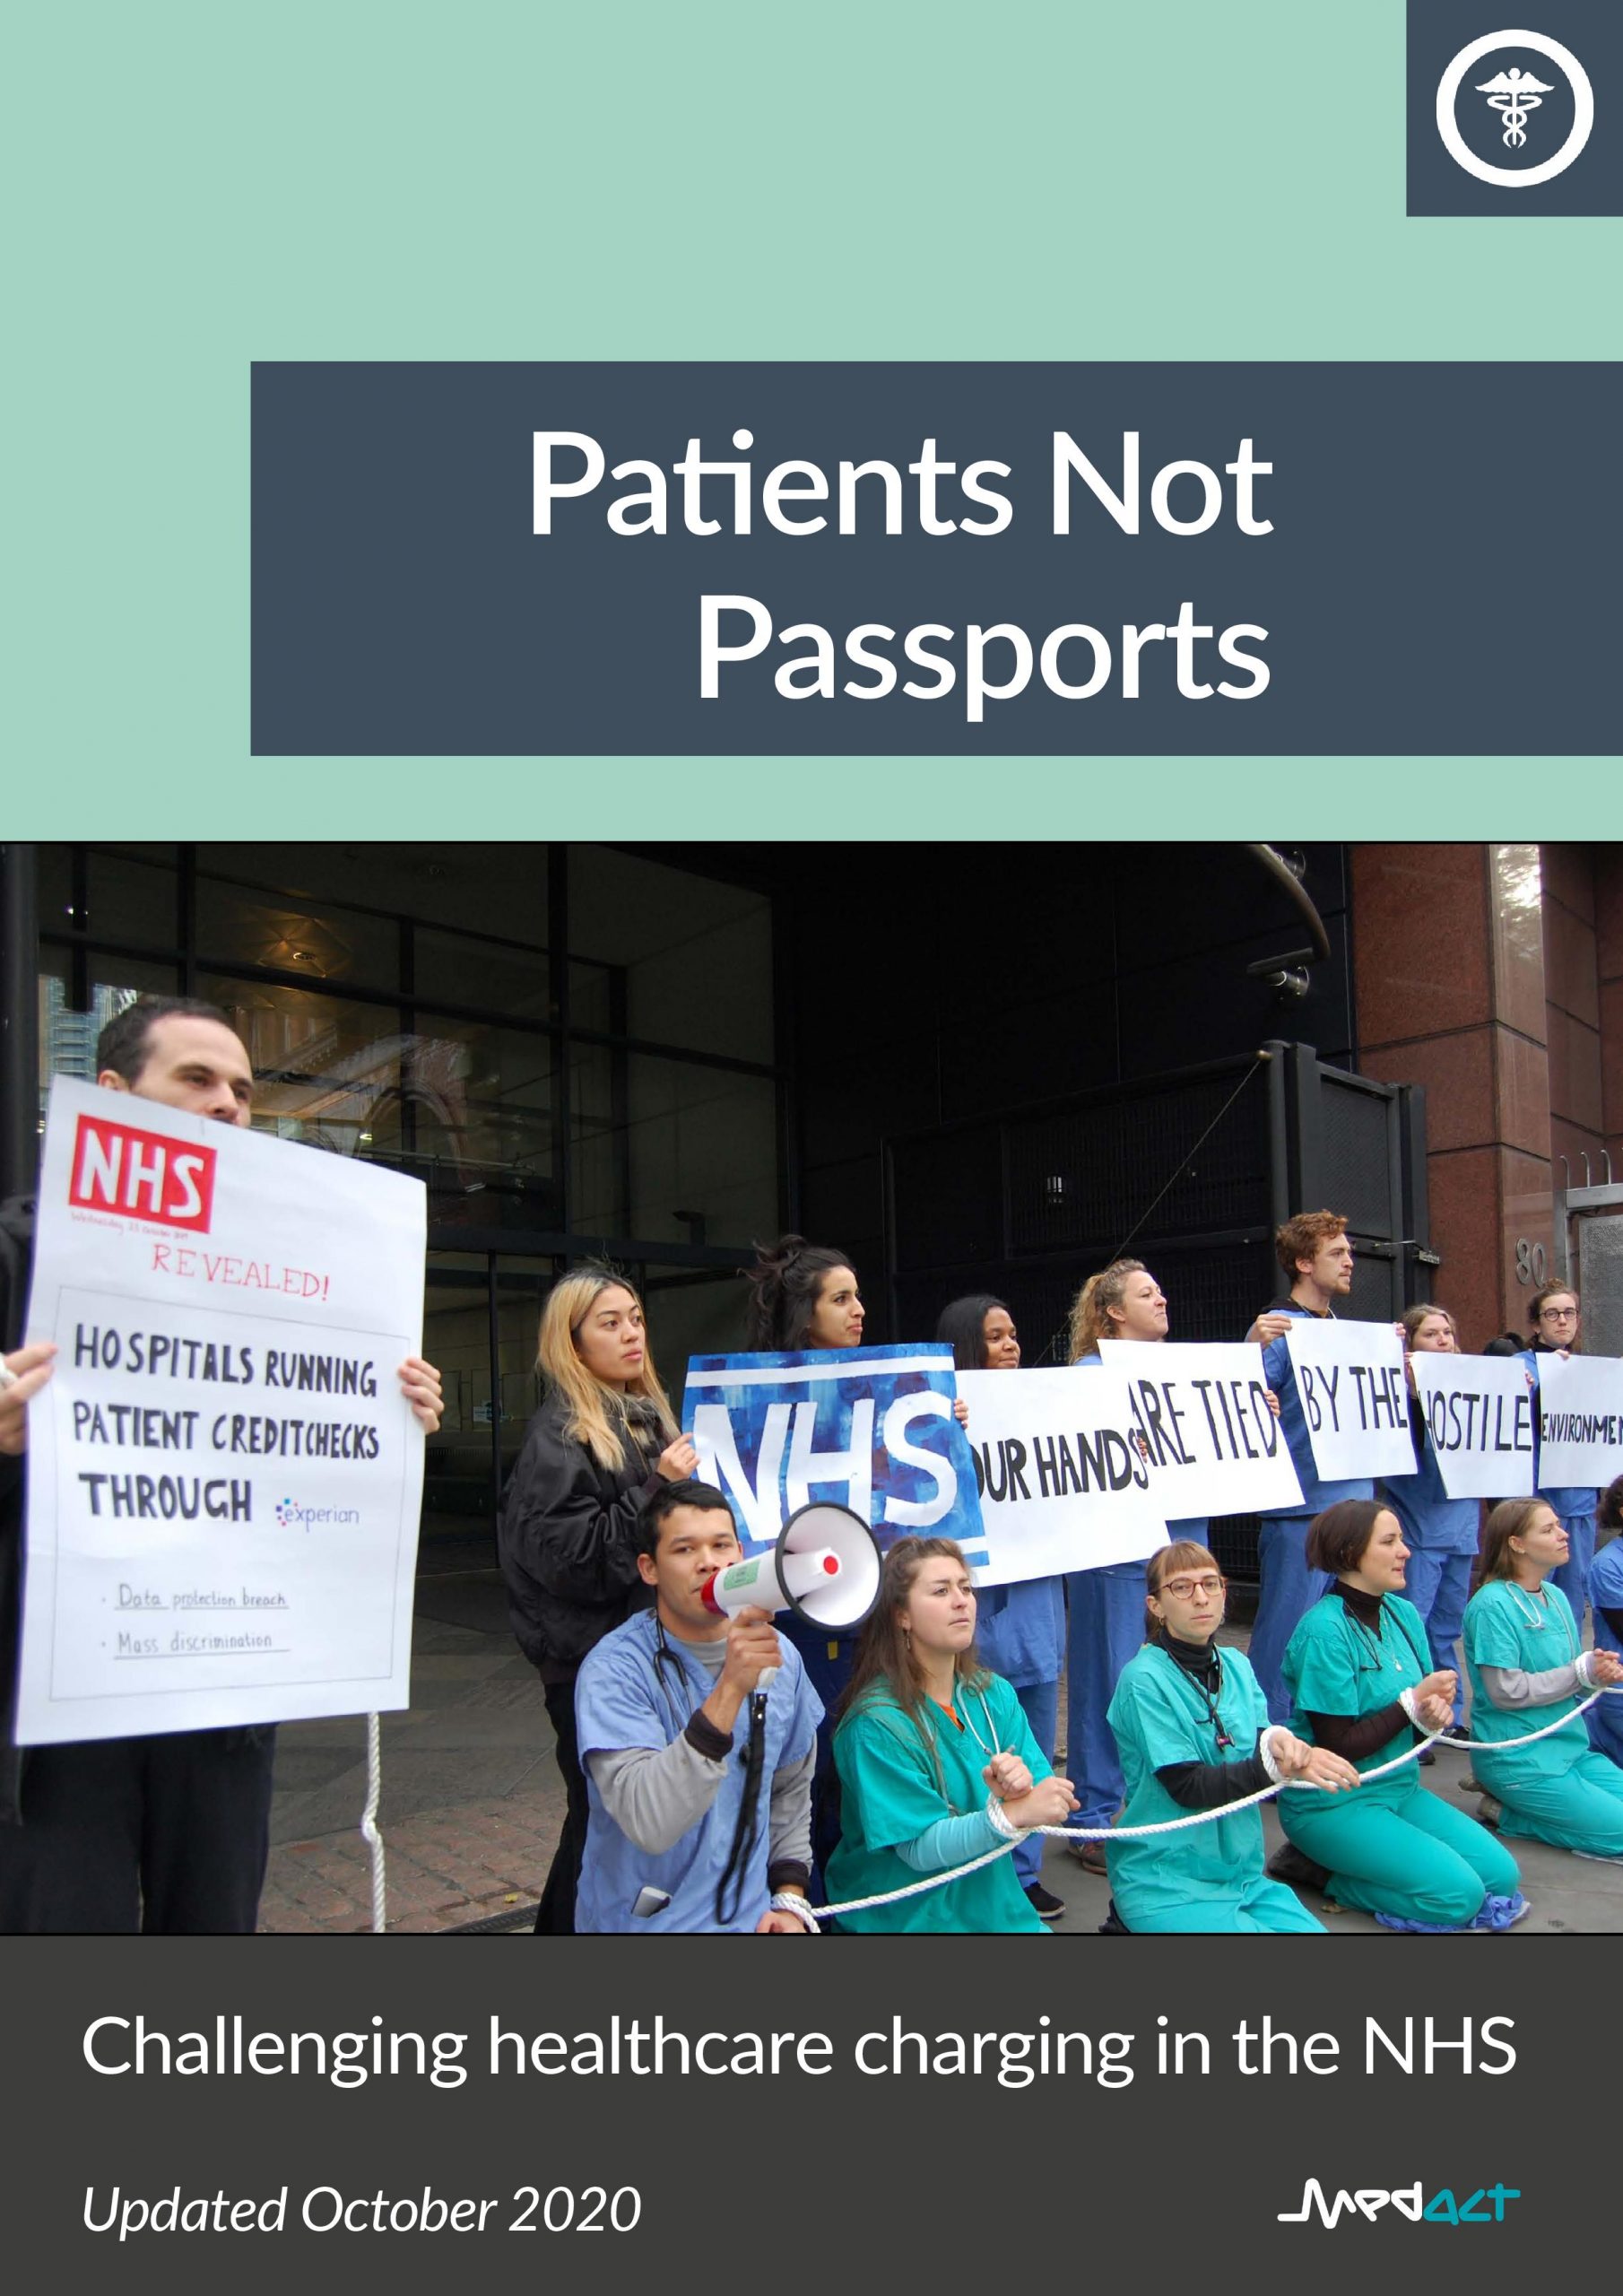 Patients Not Passports – challenging healthcare charging in the NHS